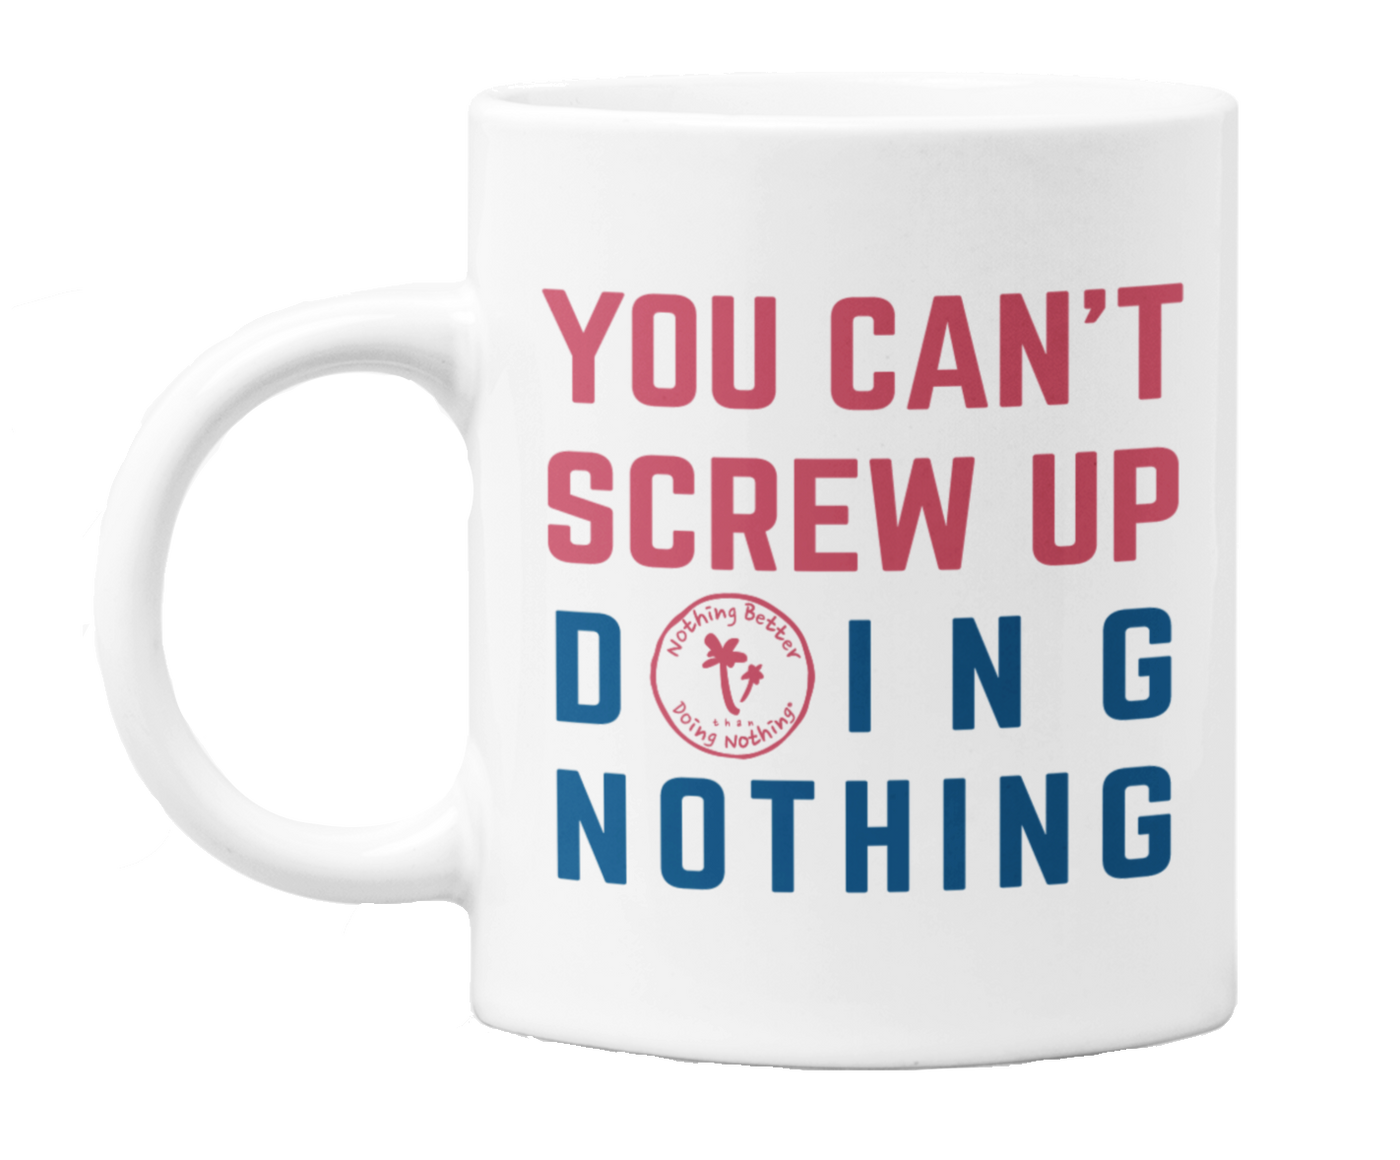 You Can't Screw Up Doing Nothing Mug